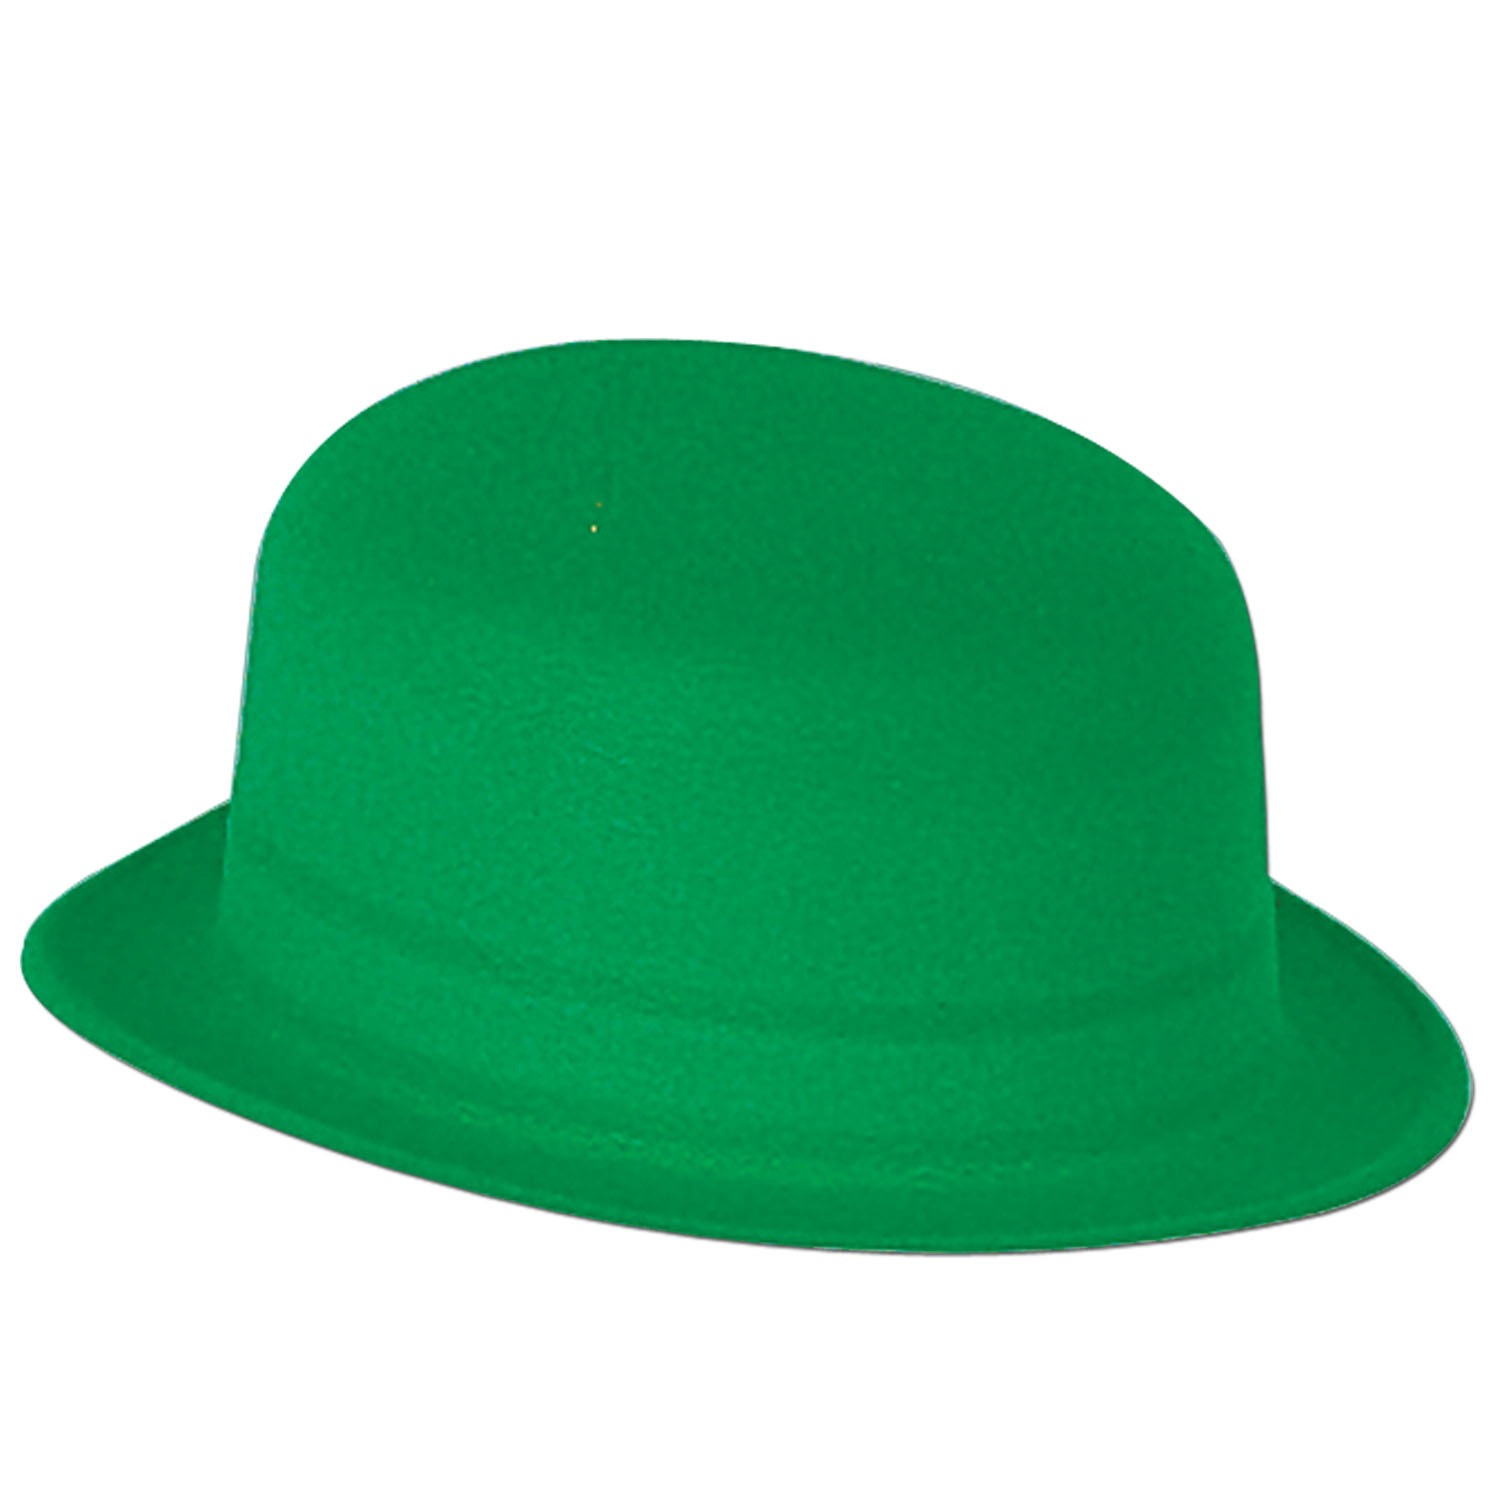 24 Pieces Green Velour Derby One Size Fits Most - St. Patricks